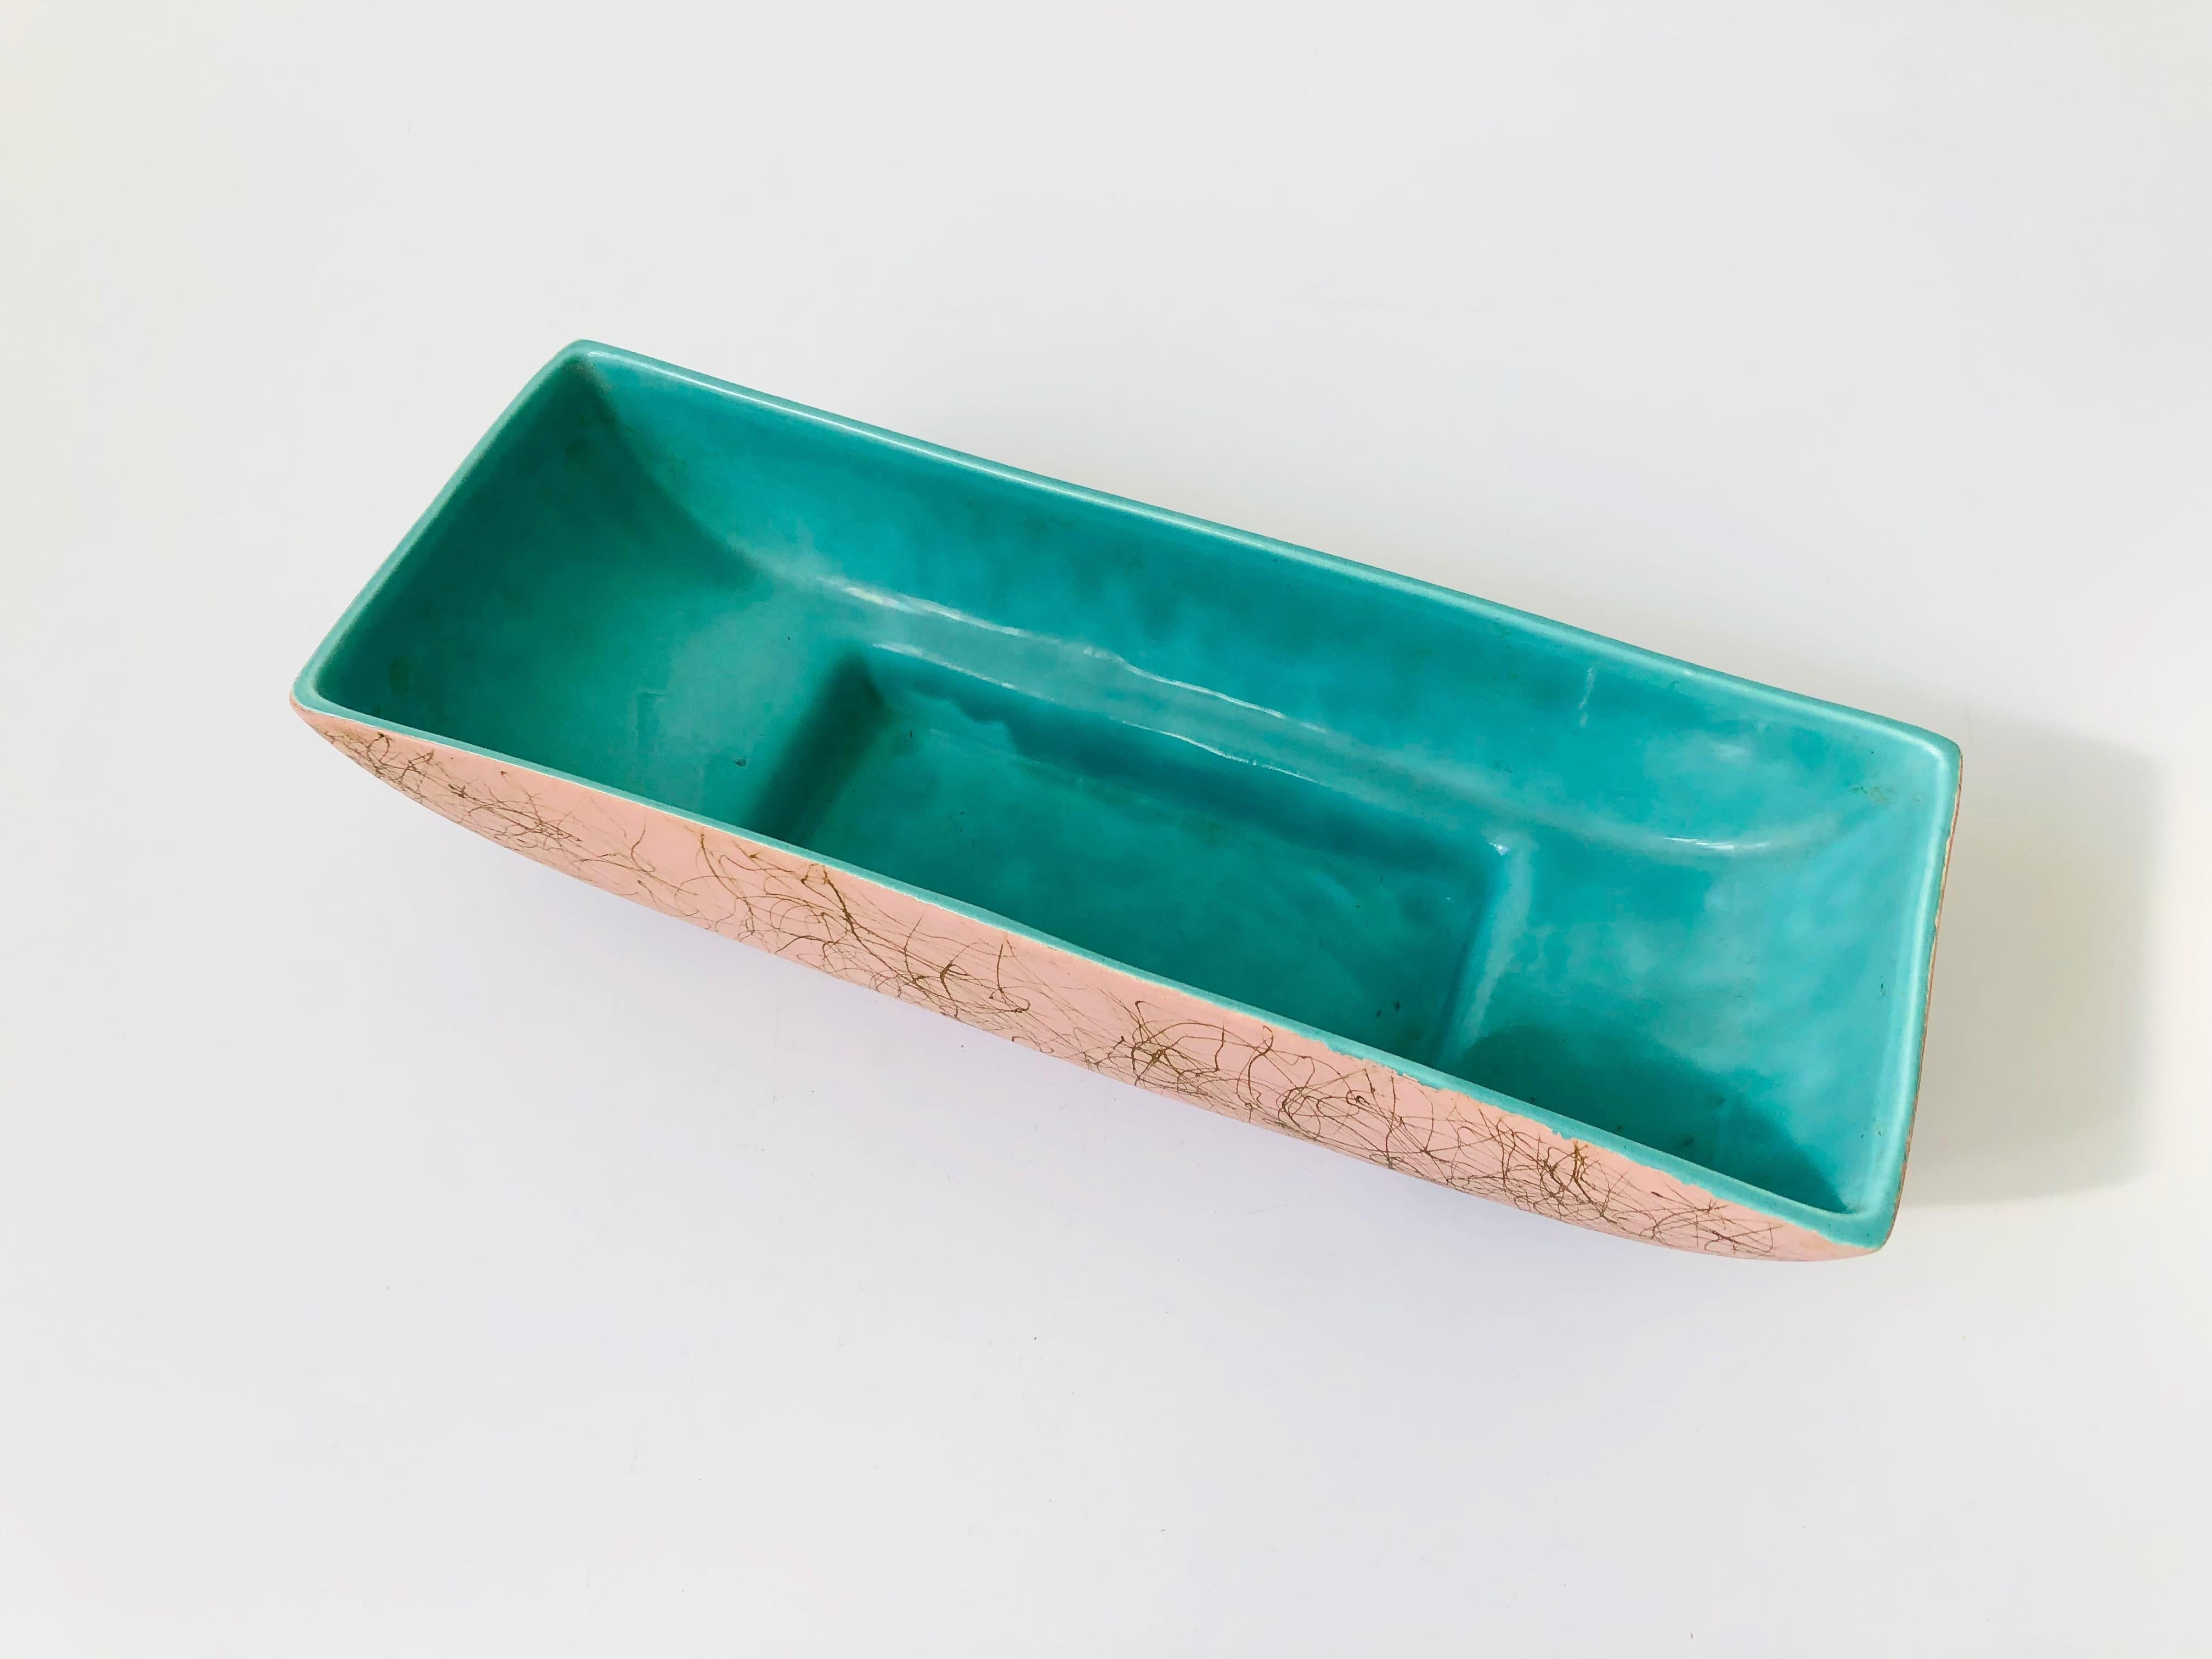 A mid-century pottery planter bowl made by Maddux of California. Nice long rectangular shape, perfect for using as a centrepiece. Light pink exterior glaze with a freeform gold squiggle pattern and a contrasting bright turquoise interior.
 